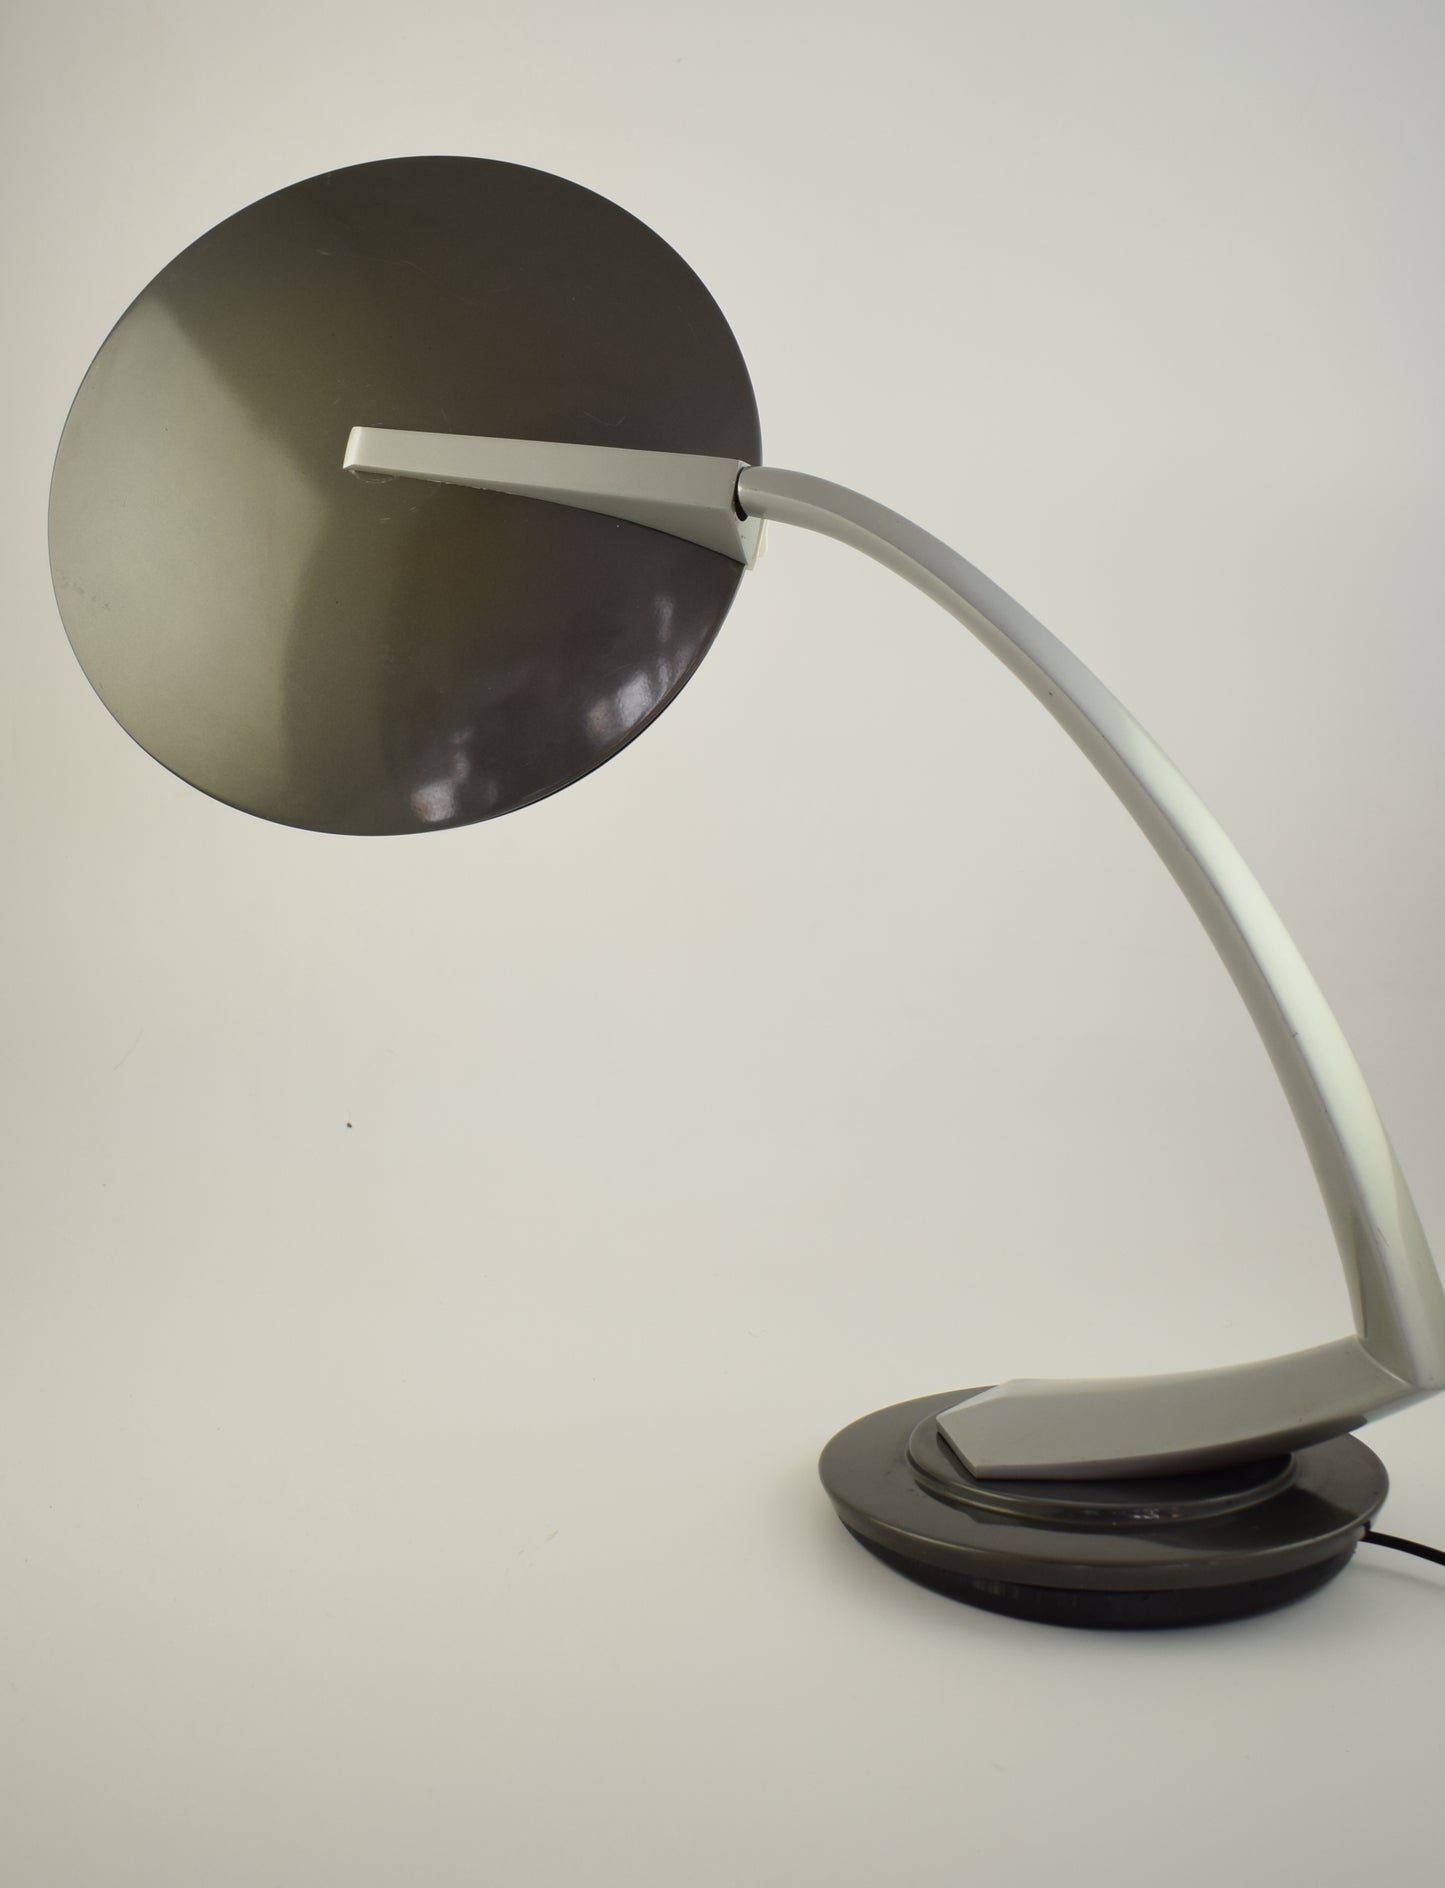 FASE BOOMERANG 2000 Heavy vintage Fase Lamp from Madrid designed in the late 1960s